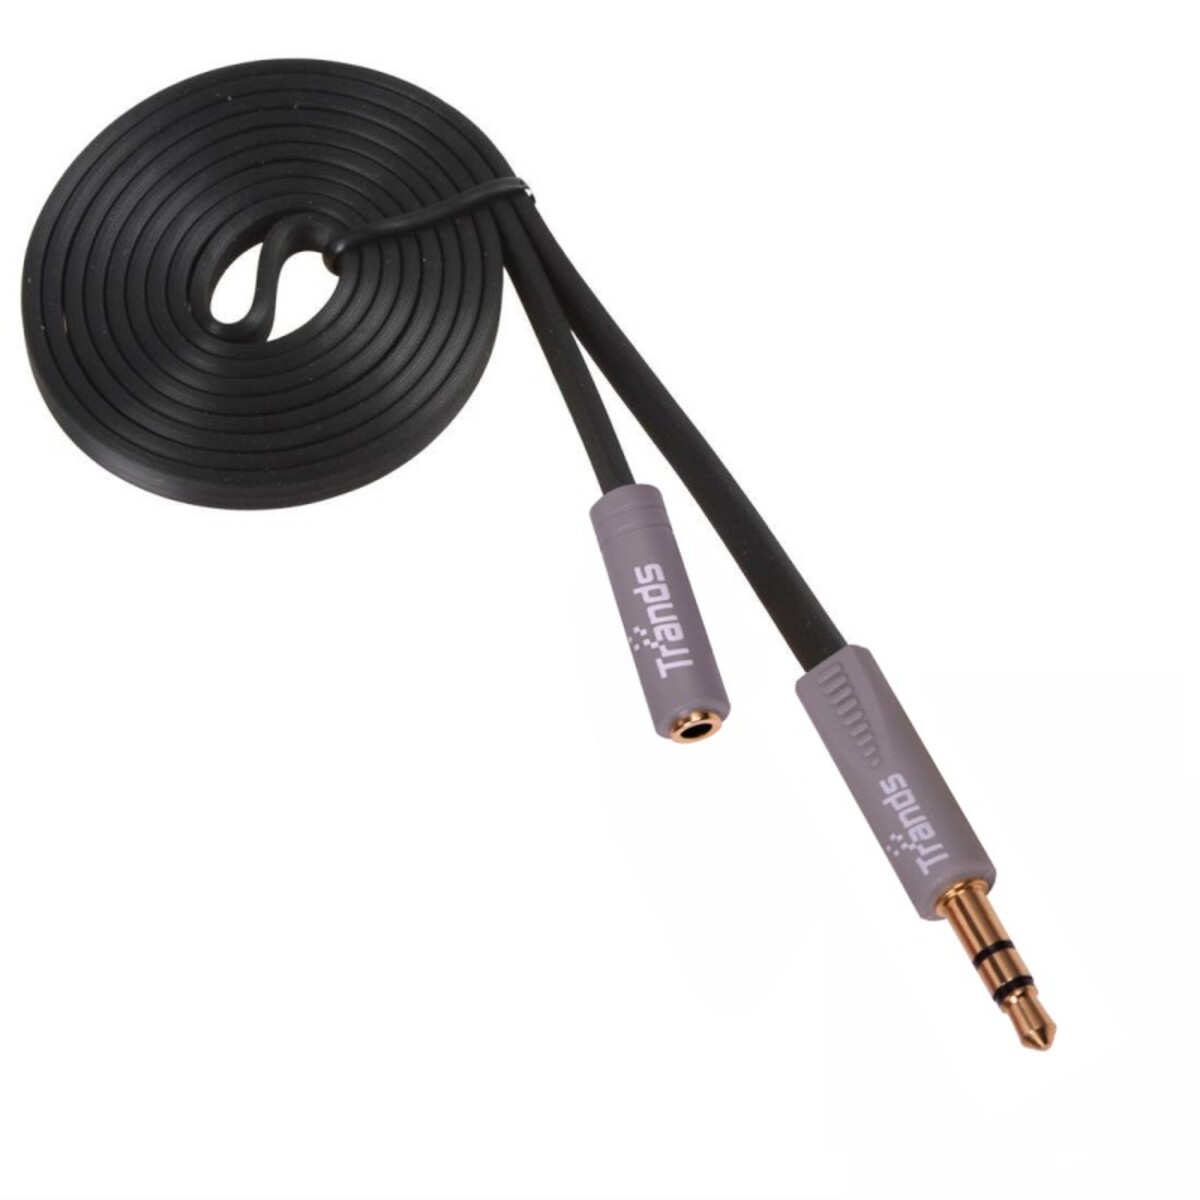 Trands 3.5mm Male Jack To 3.5mm Female Socket Aux Extension Cable, 3 Meters CA3441